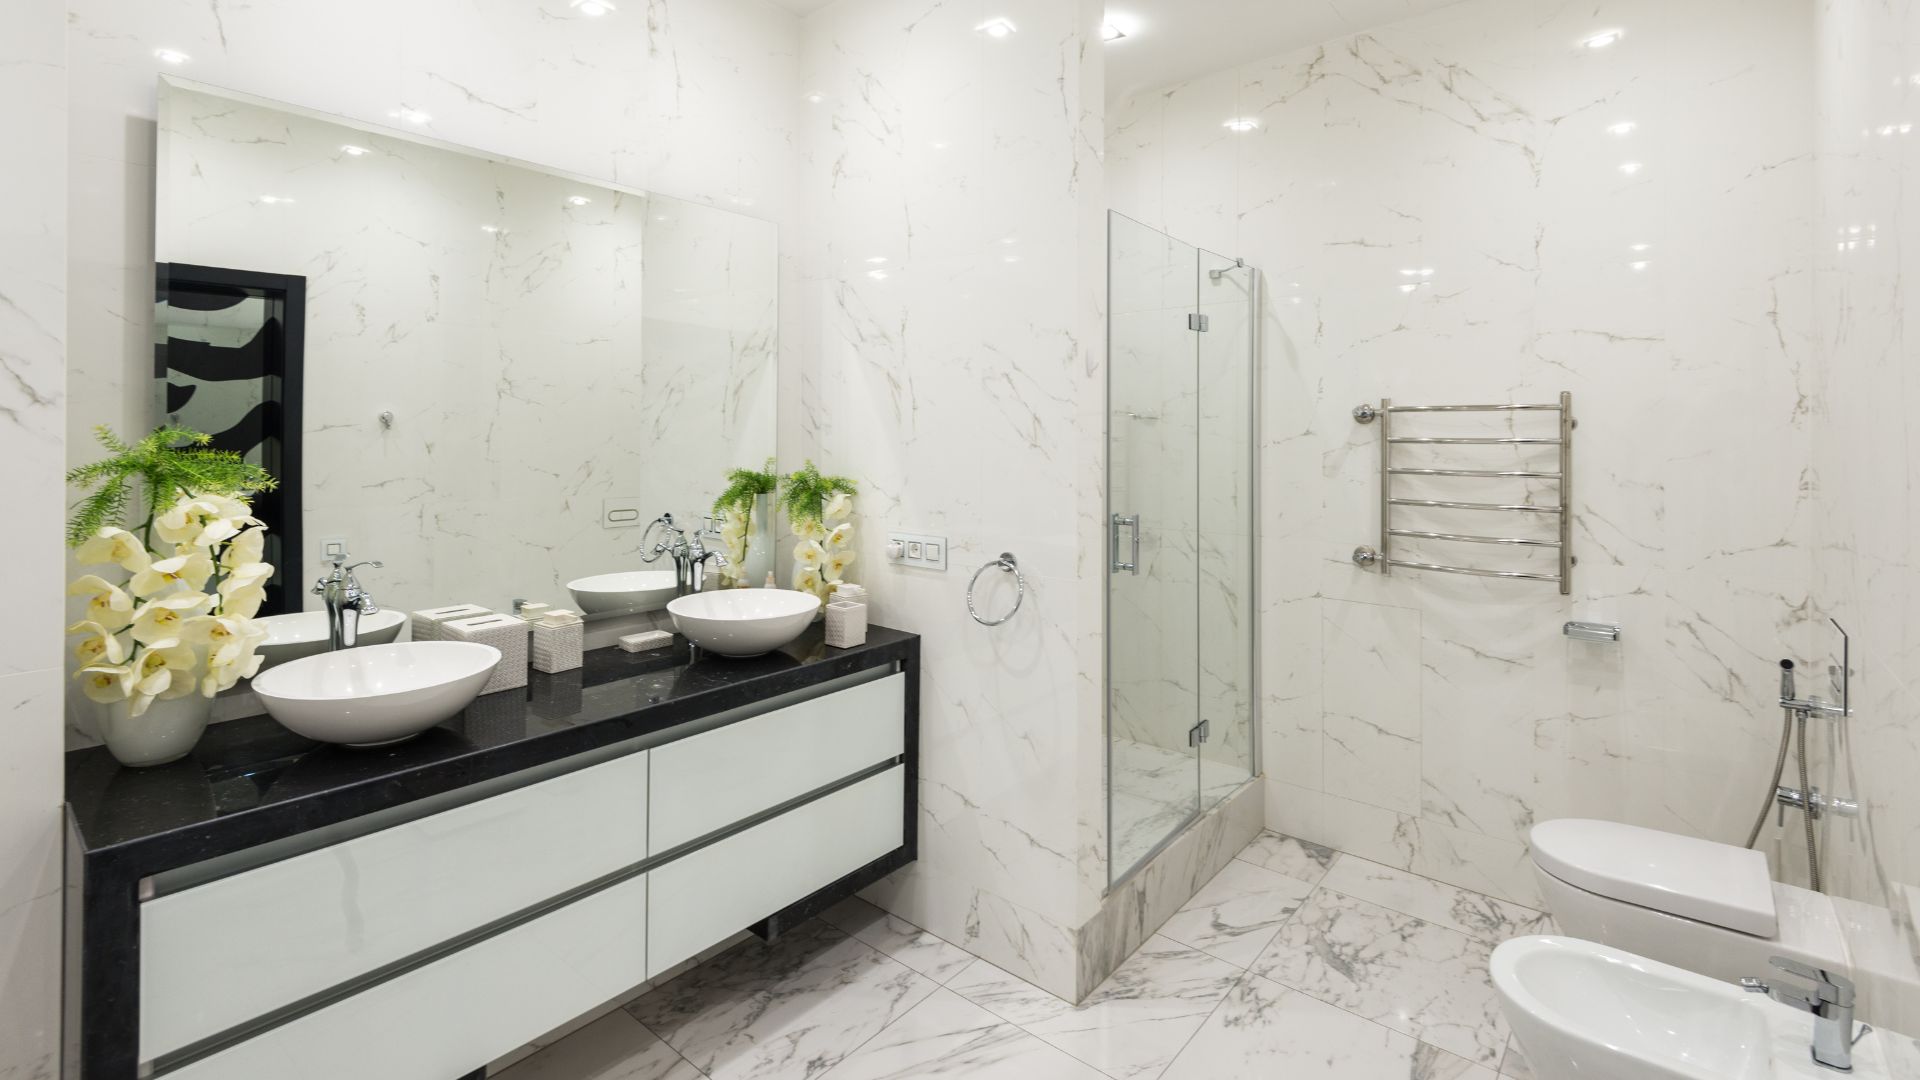 3 Signs That Indicate You Need a Bathroom Makeover